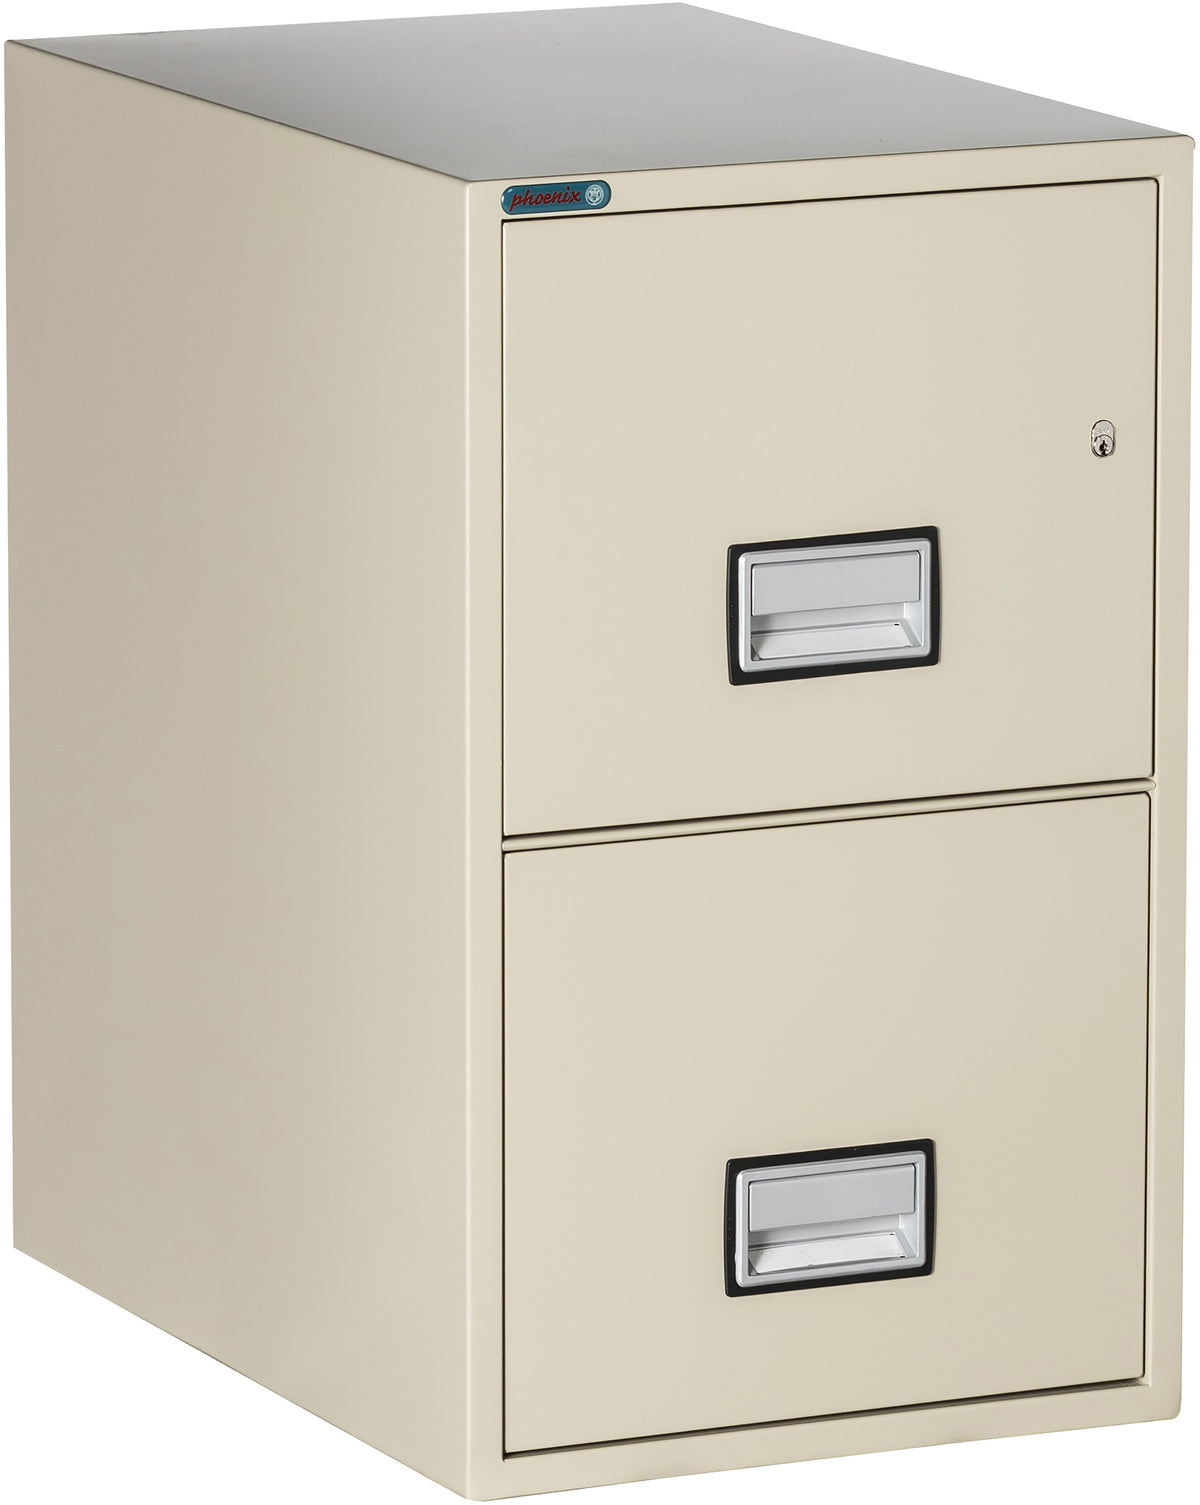 Phoenix Safe LTR2W25 25 inch 2 Drawer Letter Vertical Fire File Cabinet Putty